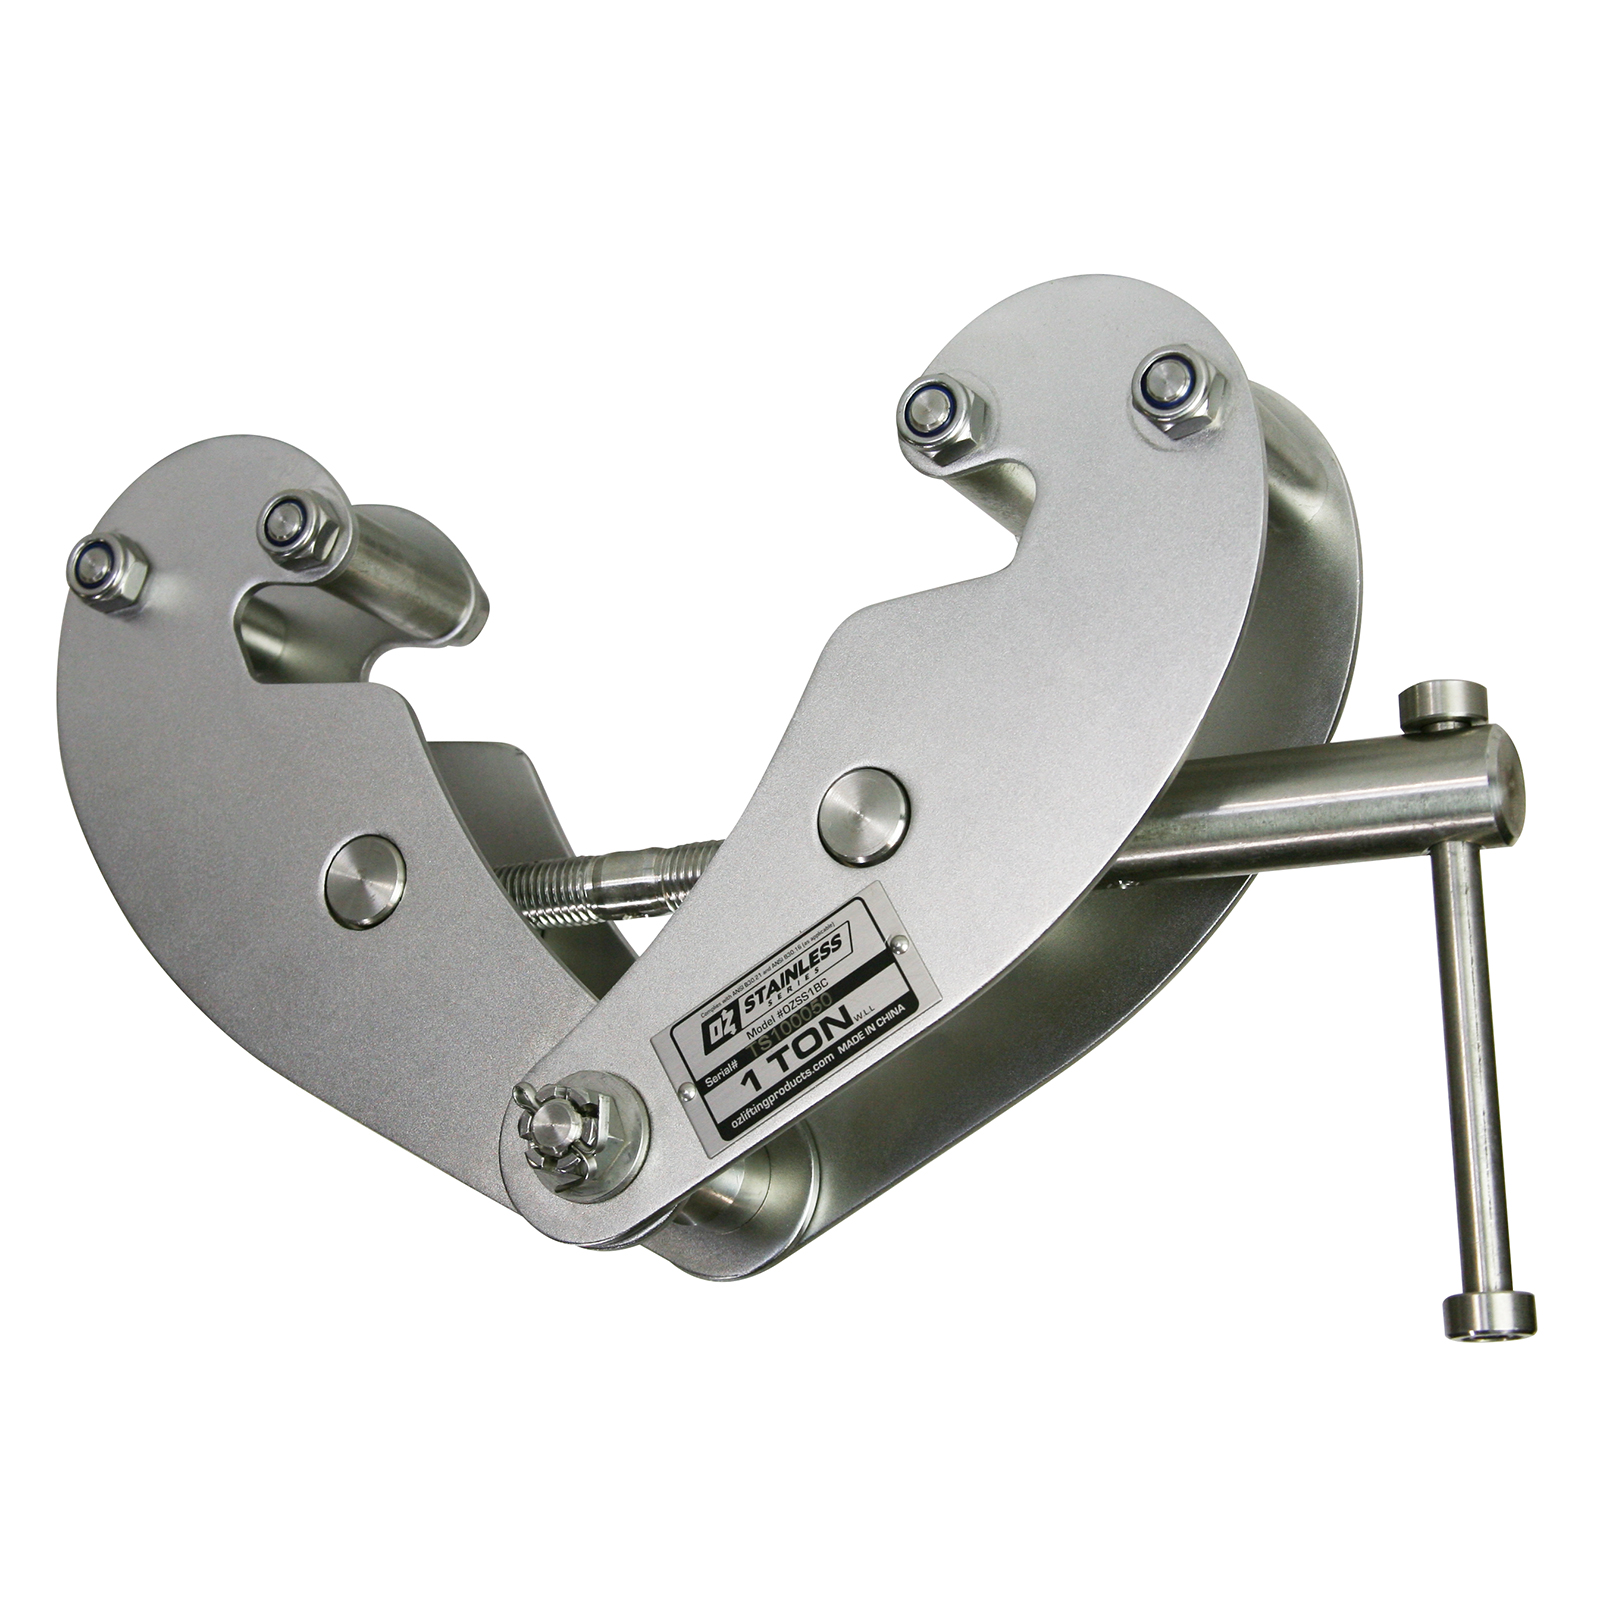 OZ Lifting Launches Stainless Steel Beam Clamp @OZLifting